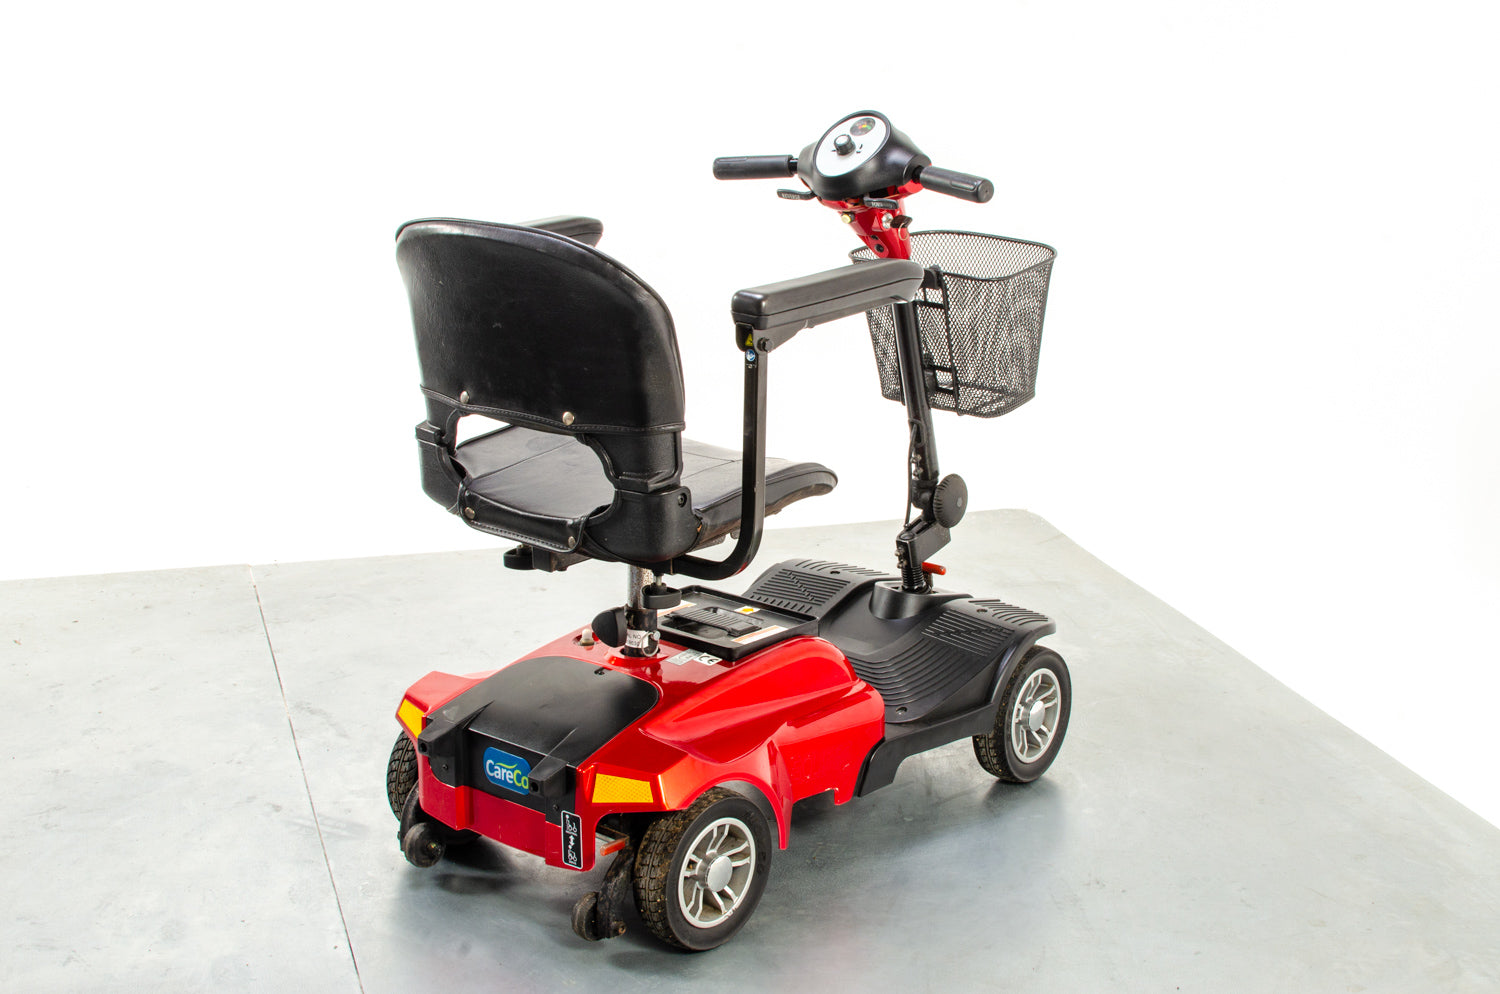 CareCo Eclipse Used Mobility Scooter Small Transportable Lighweight Boot